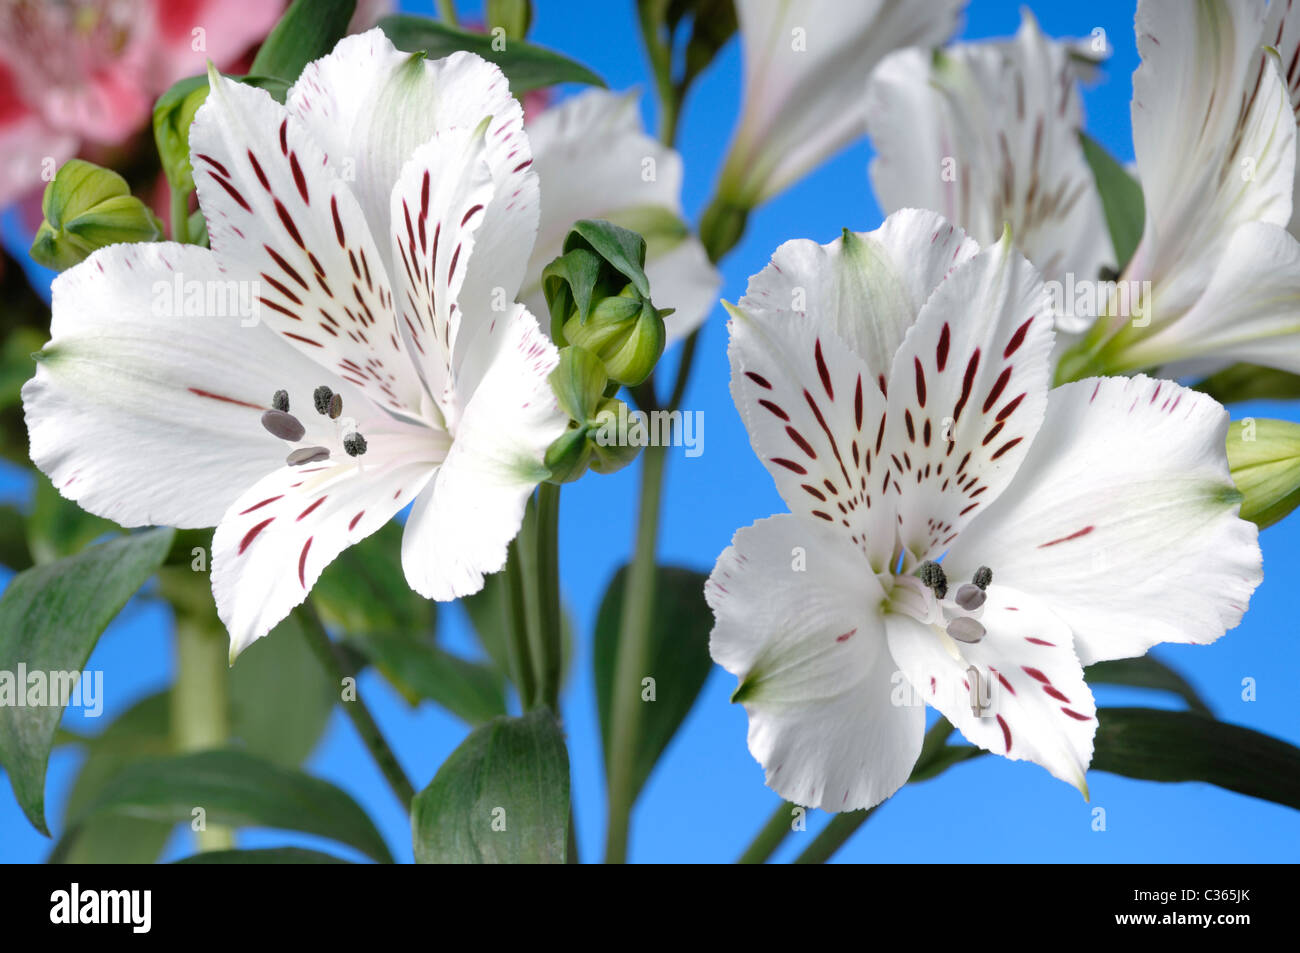 Close-up of white alstroemeria flowers Lilies of the Incas or peruvian liliies on sky blue background Stock Photo